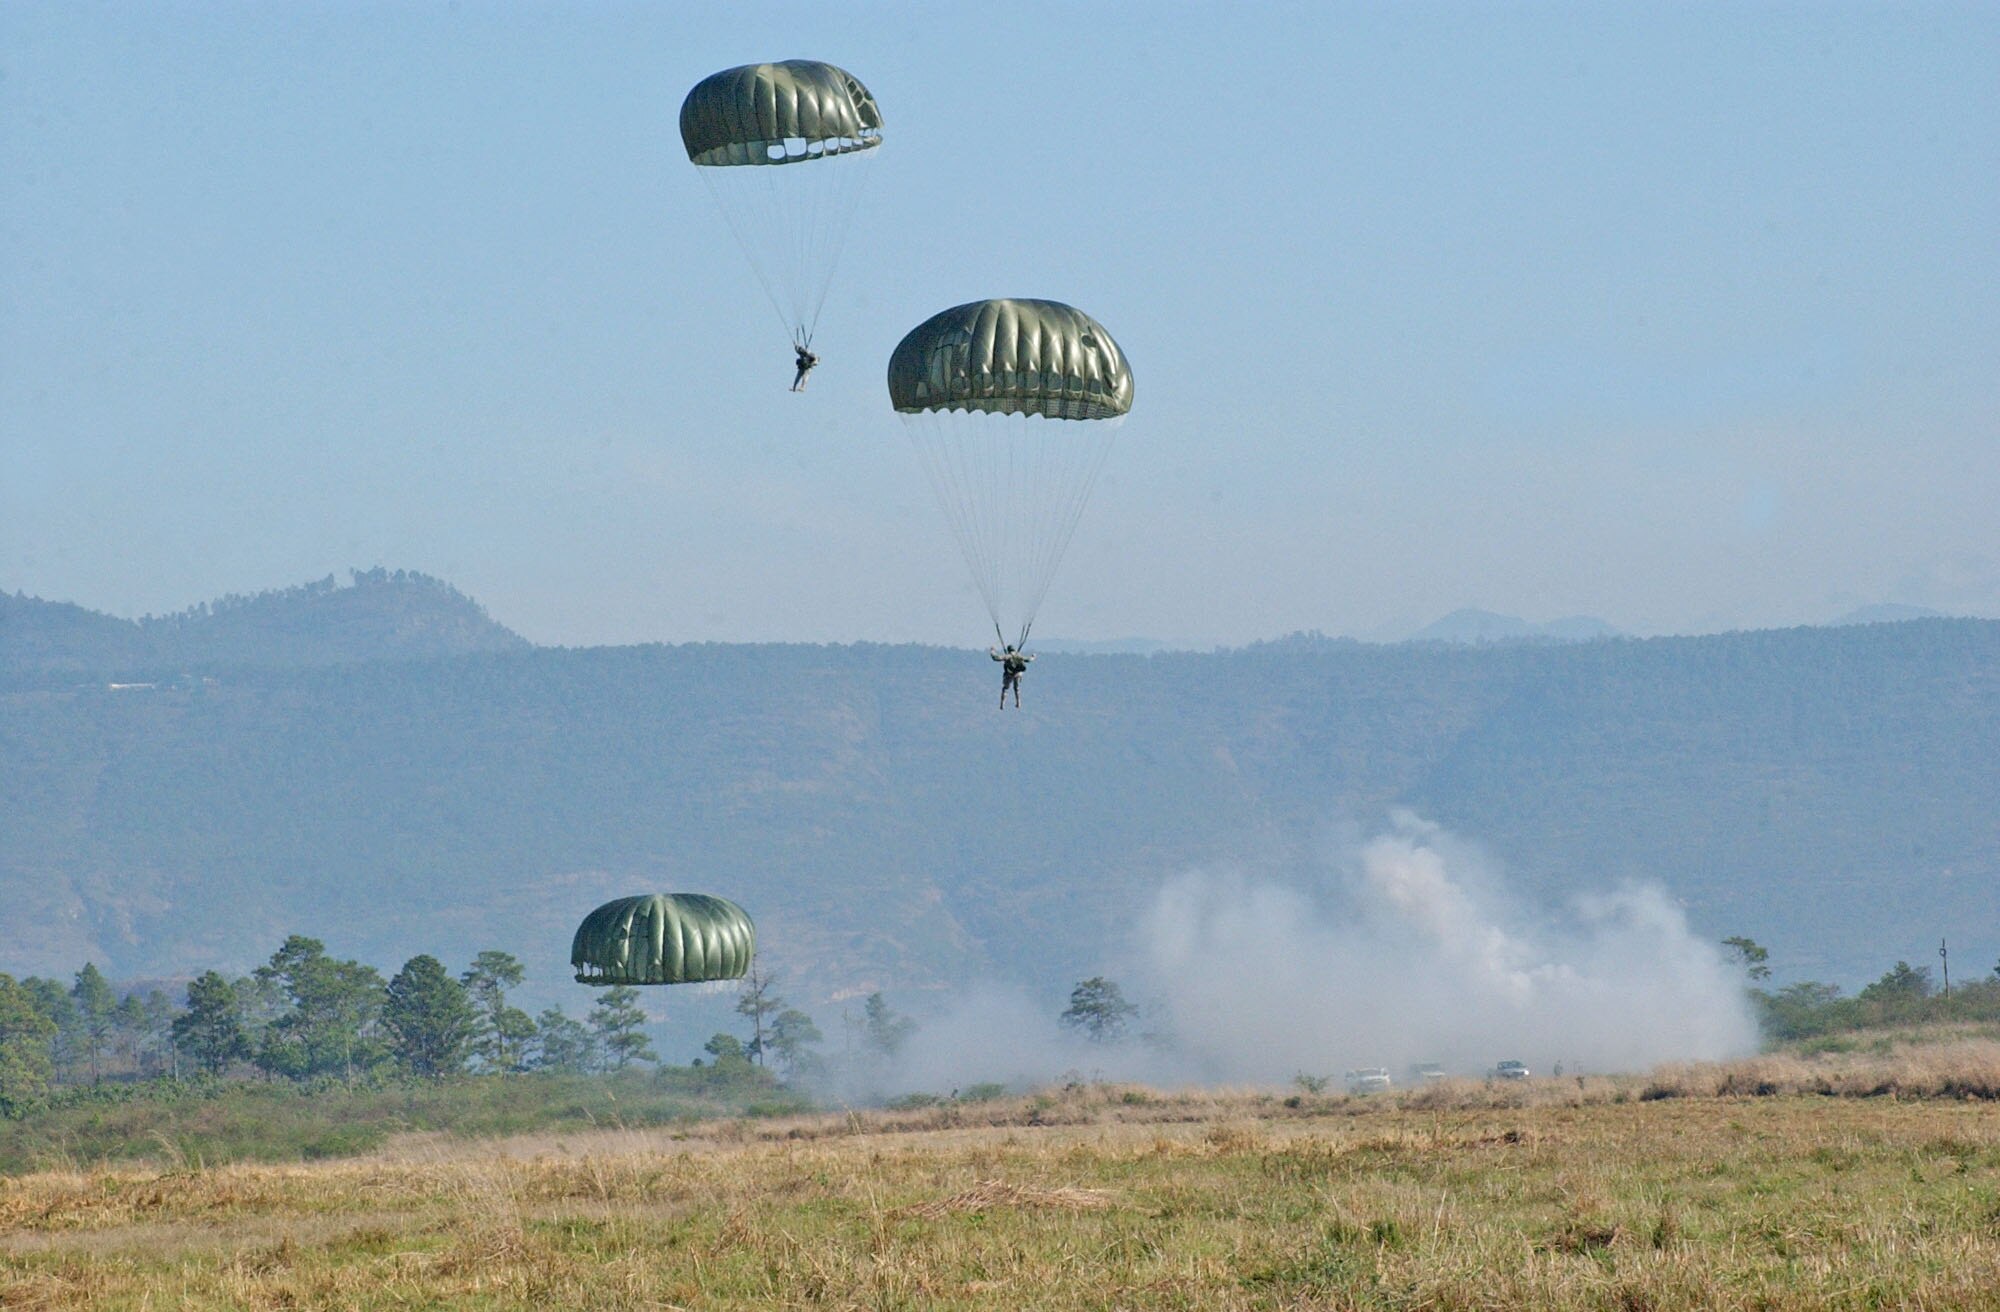 TAMARA DROP ZONE, Honduras – Paratroopers land on the drop zone during Iguana Voladora, an annual exercise that includes military members from across Central and South America.  Joint Task Force-Bravo hosted Iguana Voladora, an annual paratrooper exercise, April 29 through May 4 and hosted more than 50 paratroopers from Central and South America for the week.   (U.S. Air Force photo/Tech. Sgt. Sonny Cohrs)